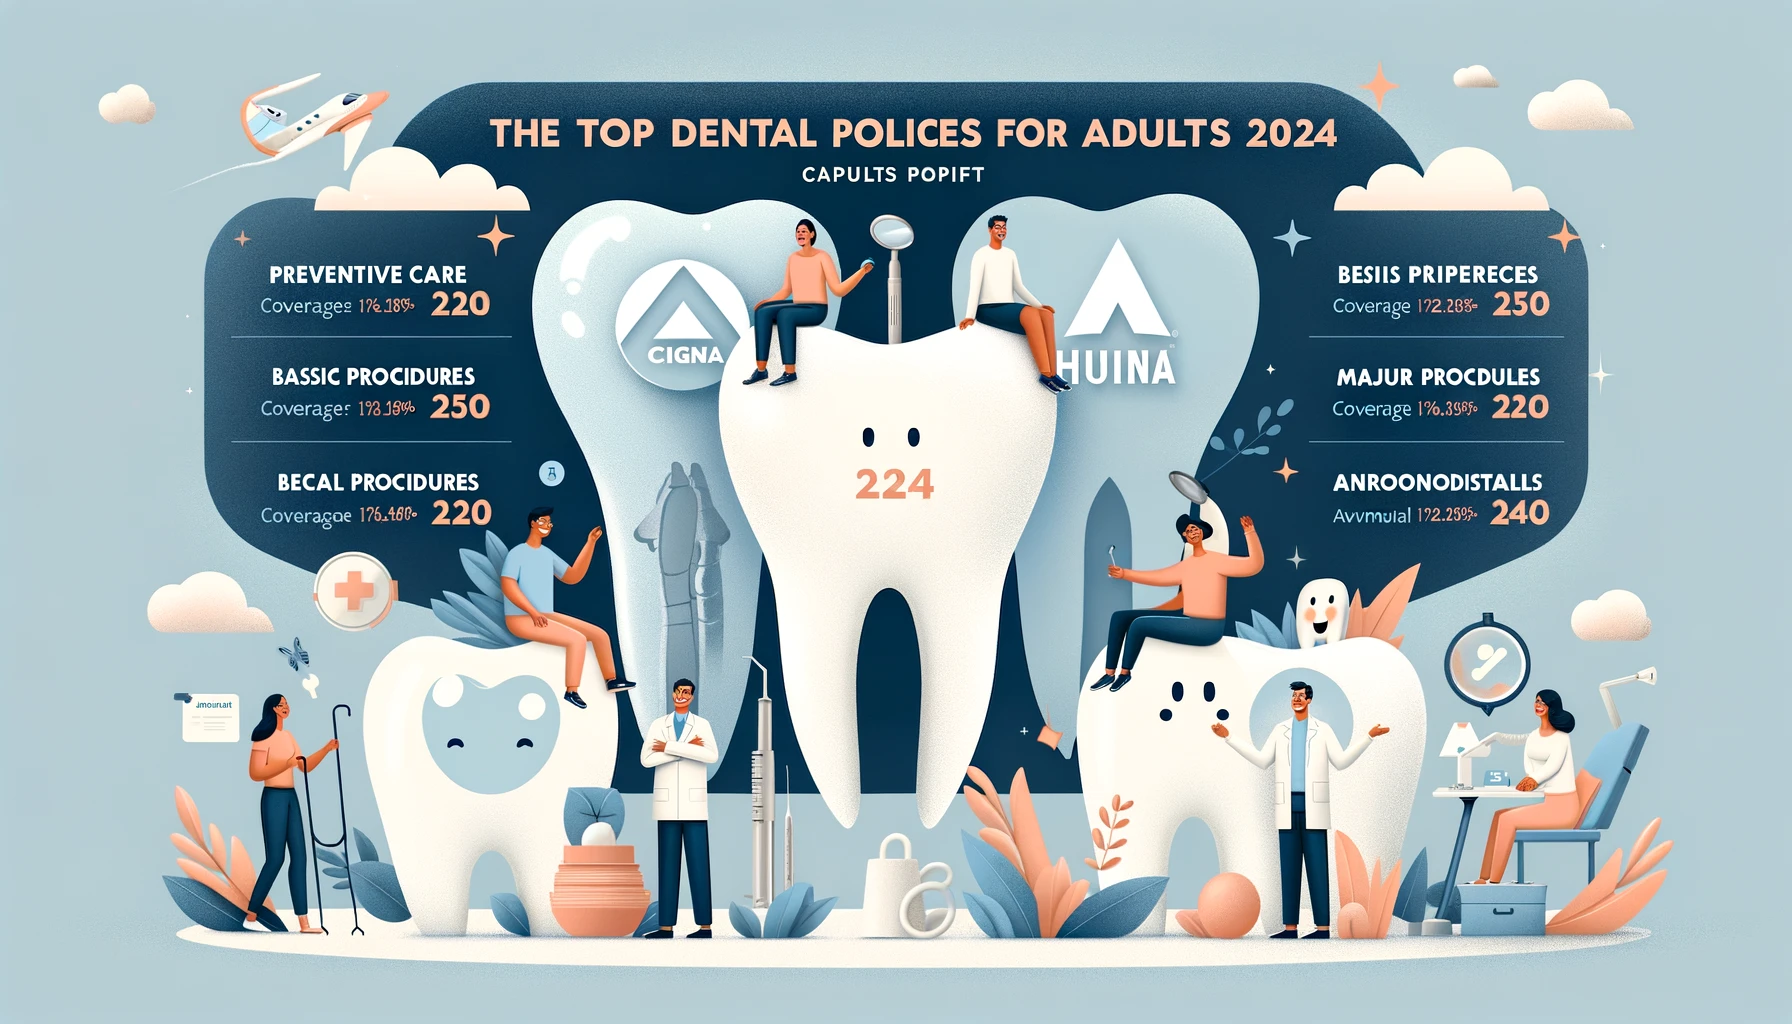 Infographic displaying top dental policies for adults in 2024 with icons and highlights of benefits from providers like Delta Dental, Cigna, Humana, MetLife, and Guardian.